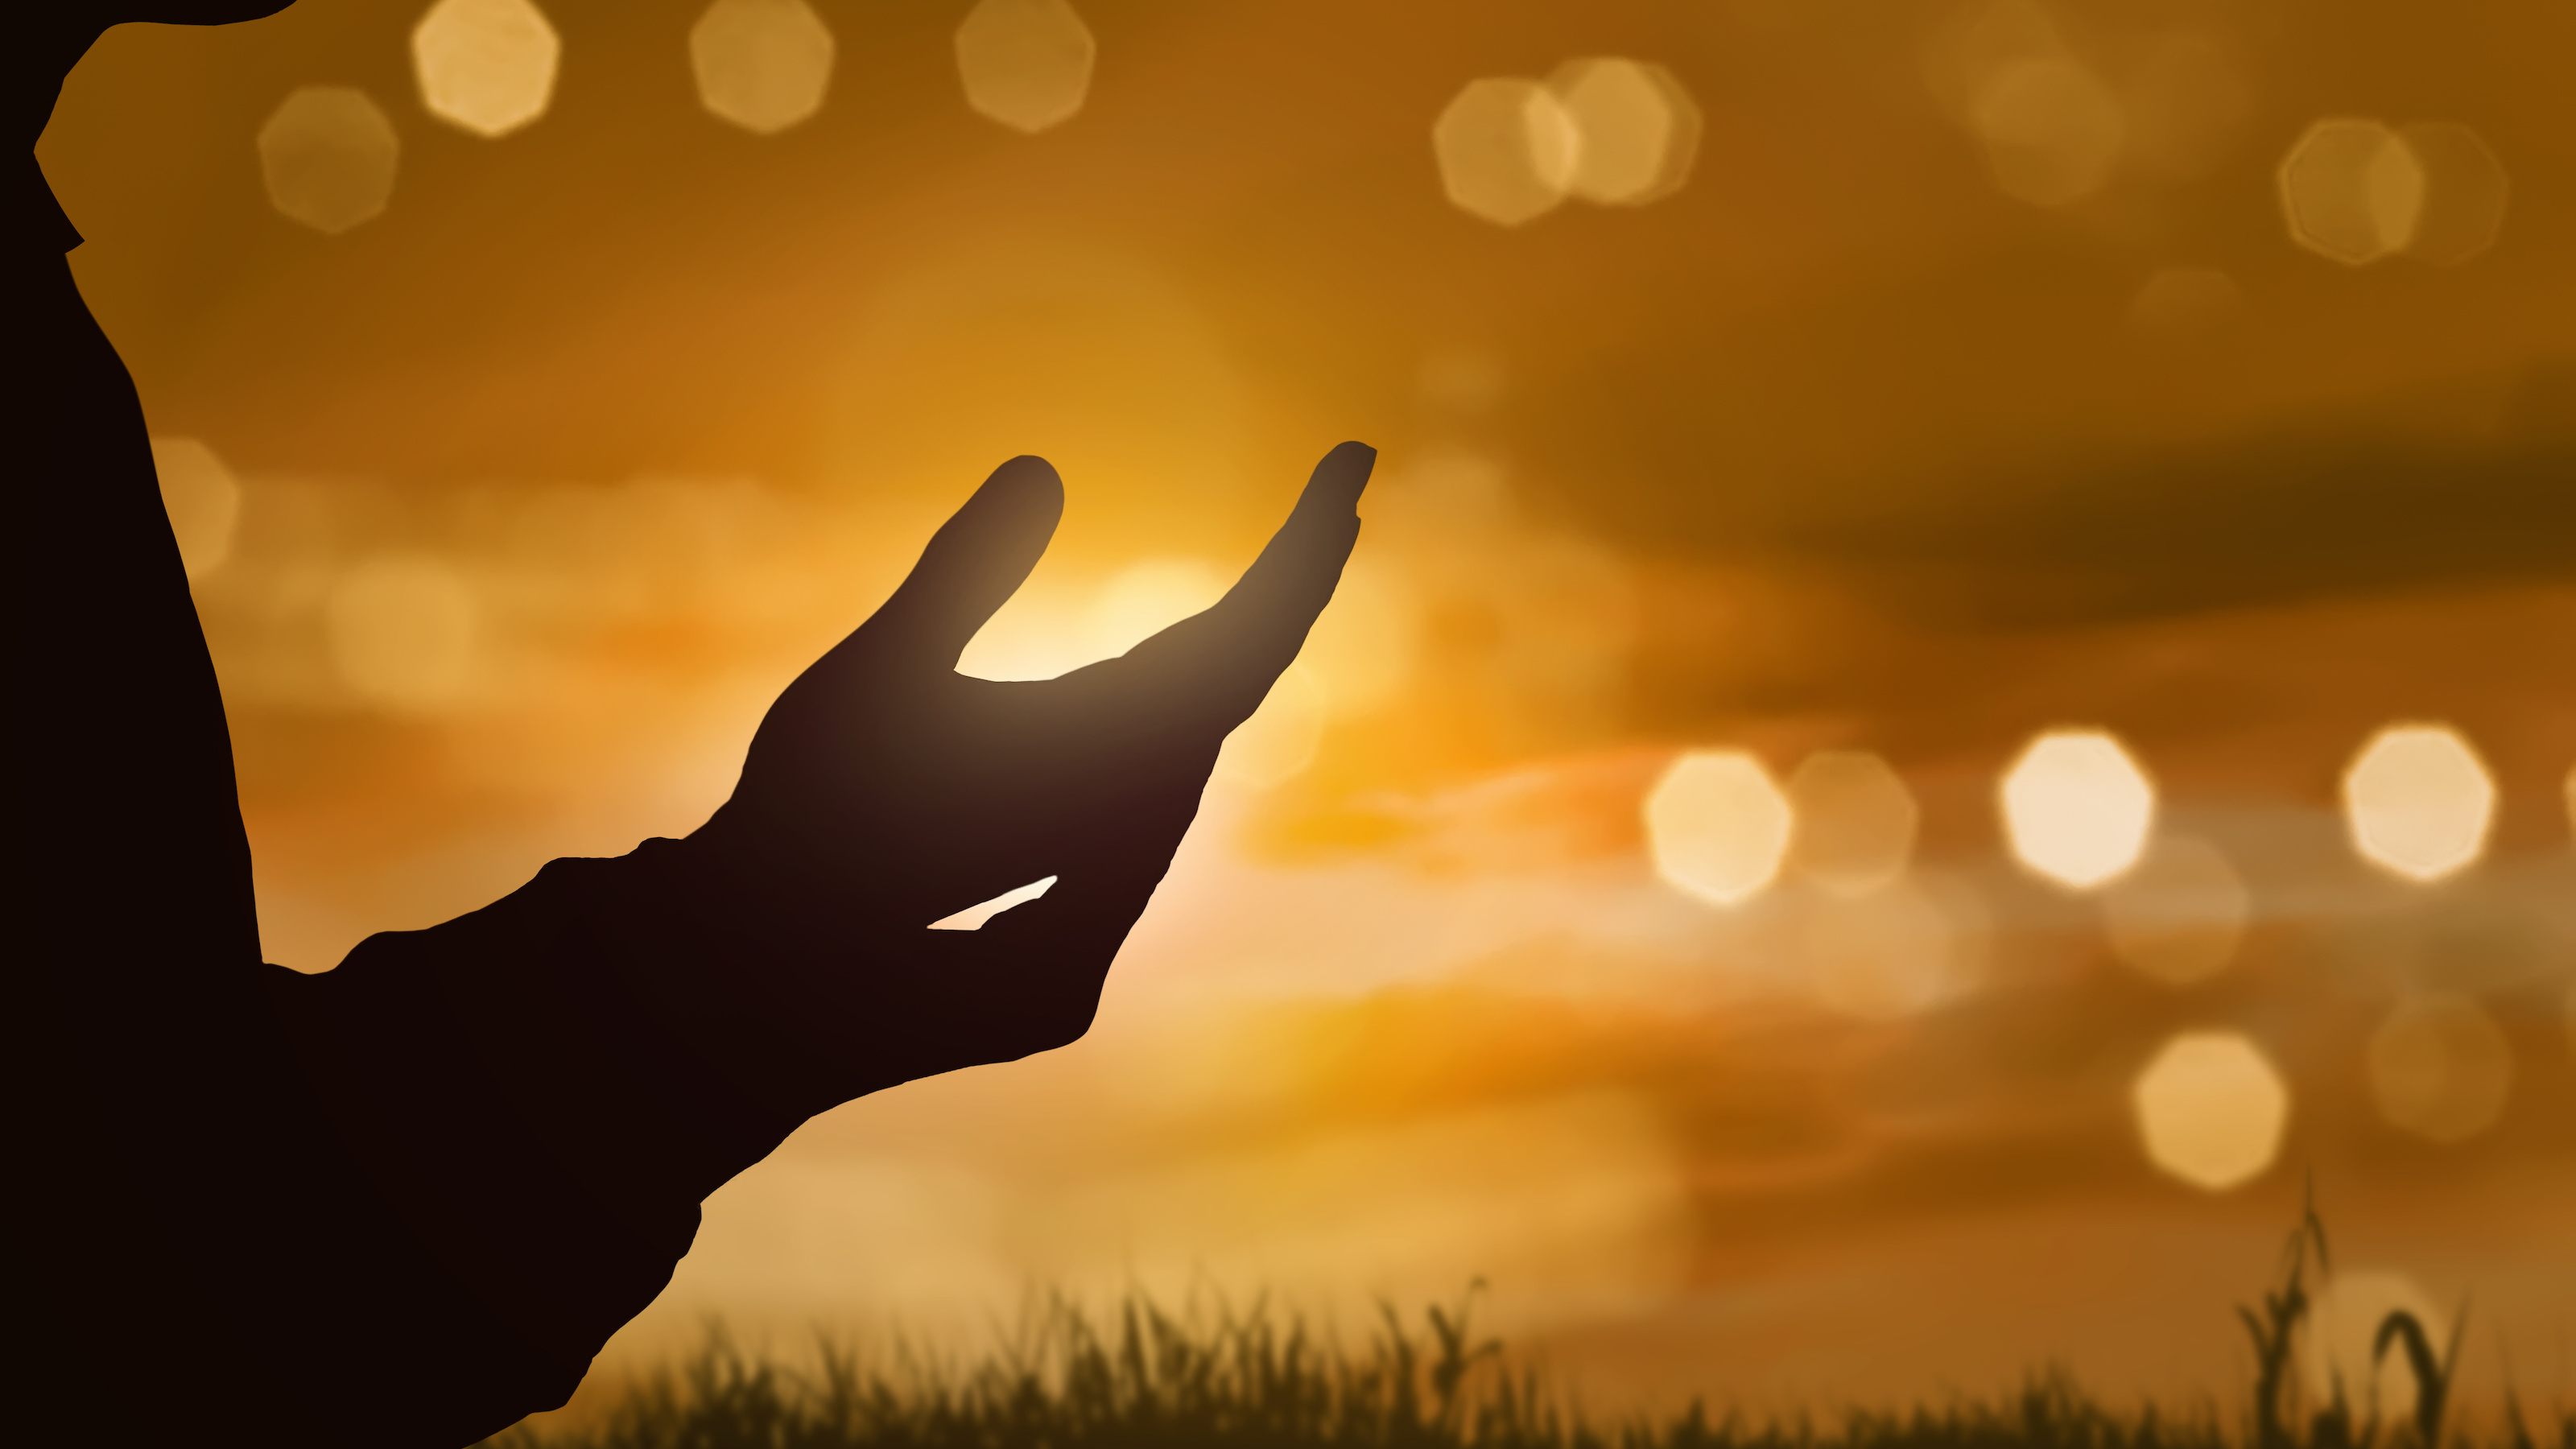 Silhouette of human hand with open palm praying to god at sunset background